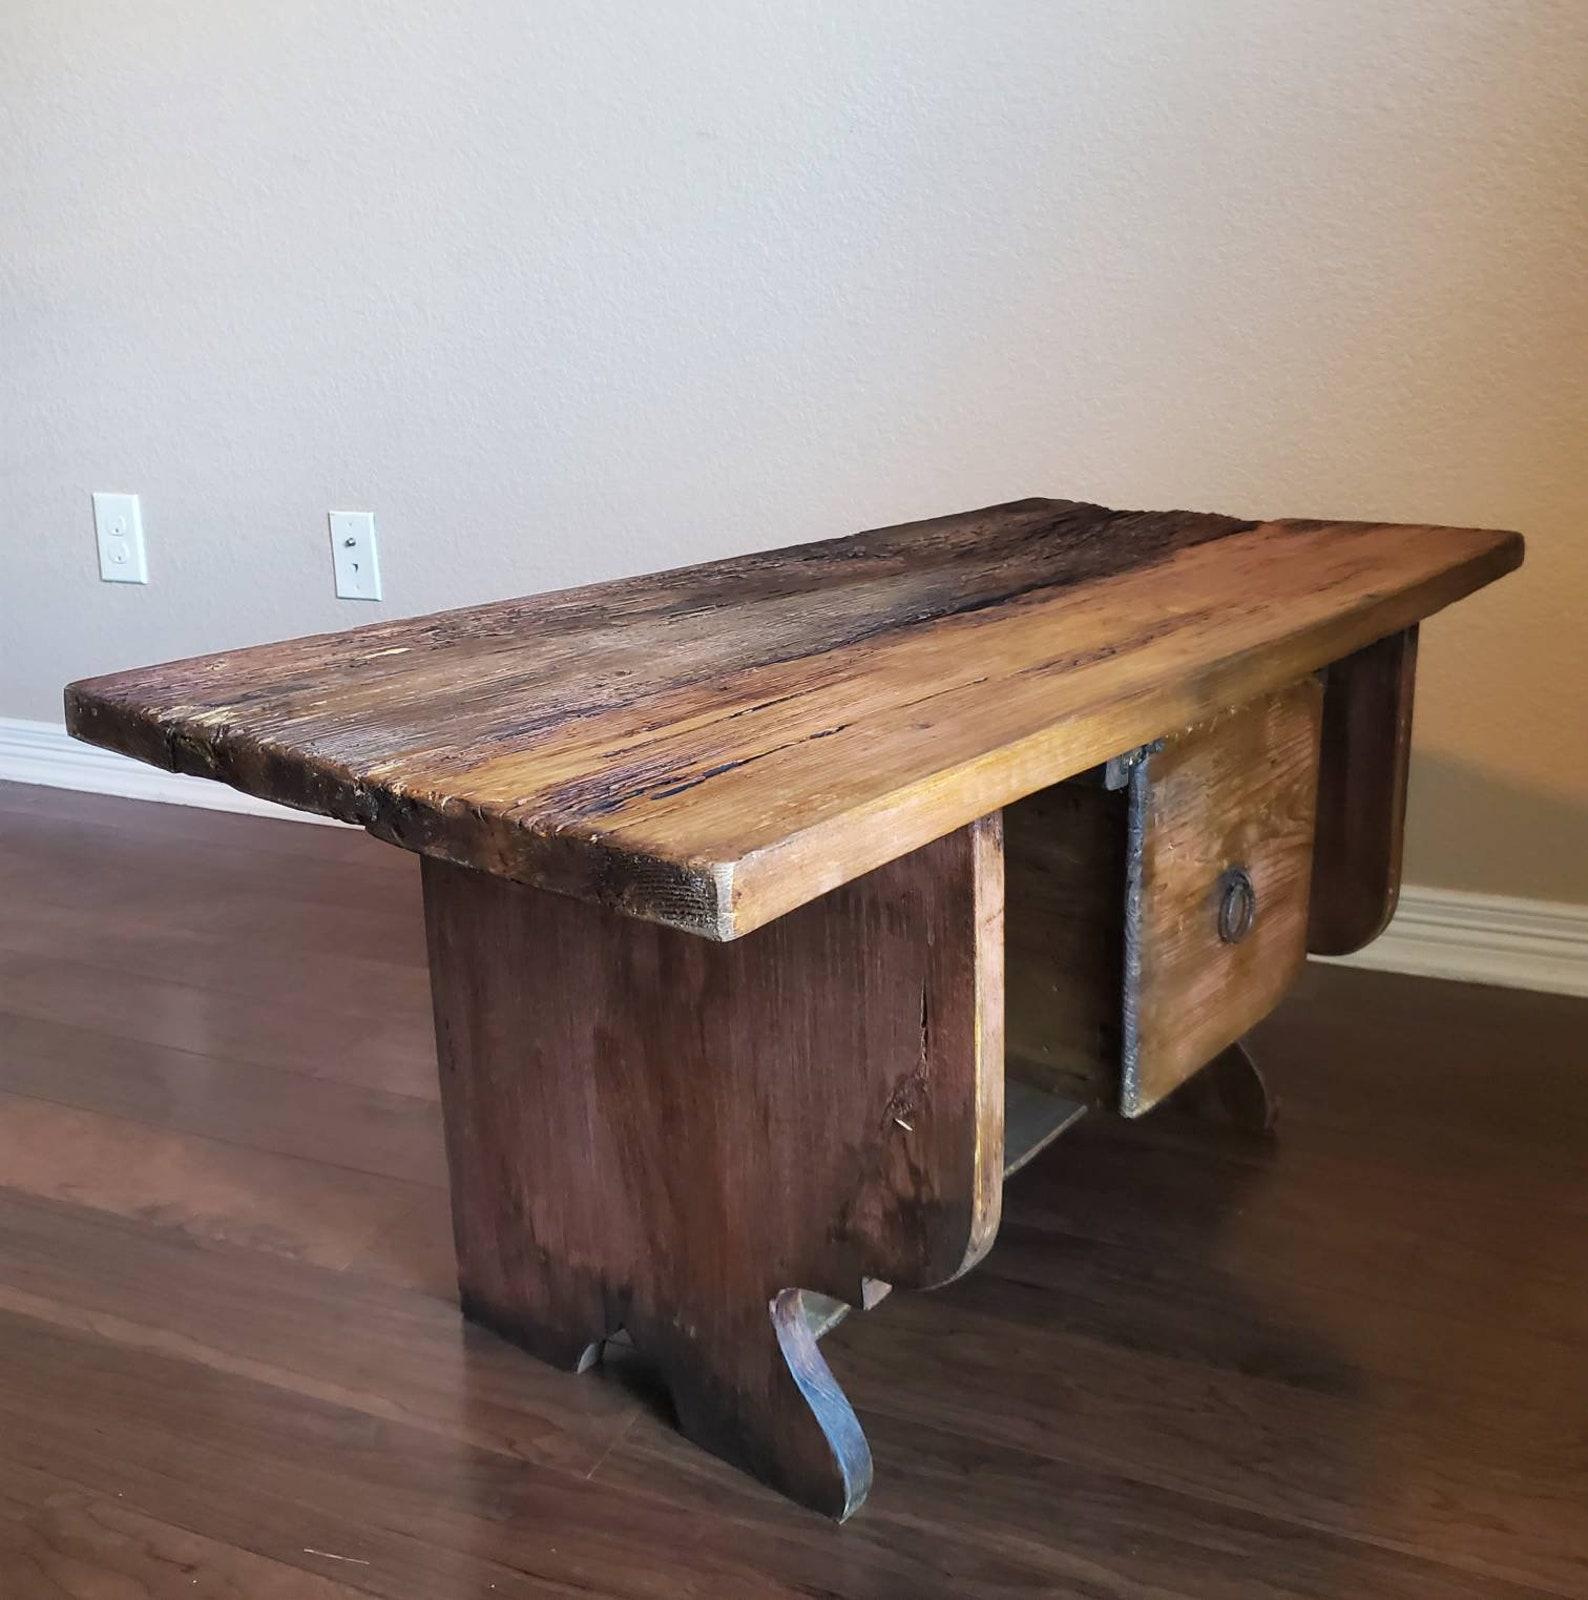 A rustic, primitive painted pine table / bench, with a live edge wood slap, loaded with interesting character, having rich antique wood color and tone, with outstanding warm, rustic patina throughout. A wonderful example of early American farm house